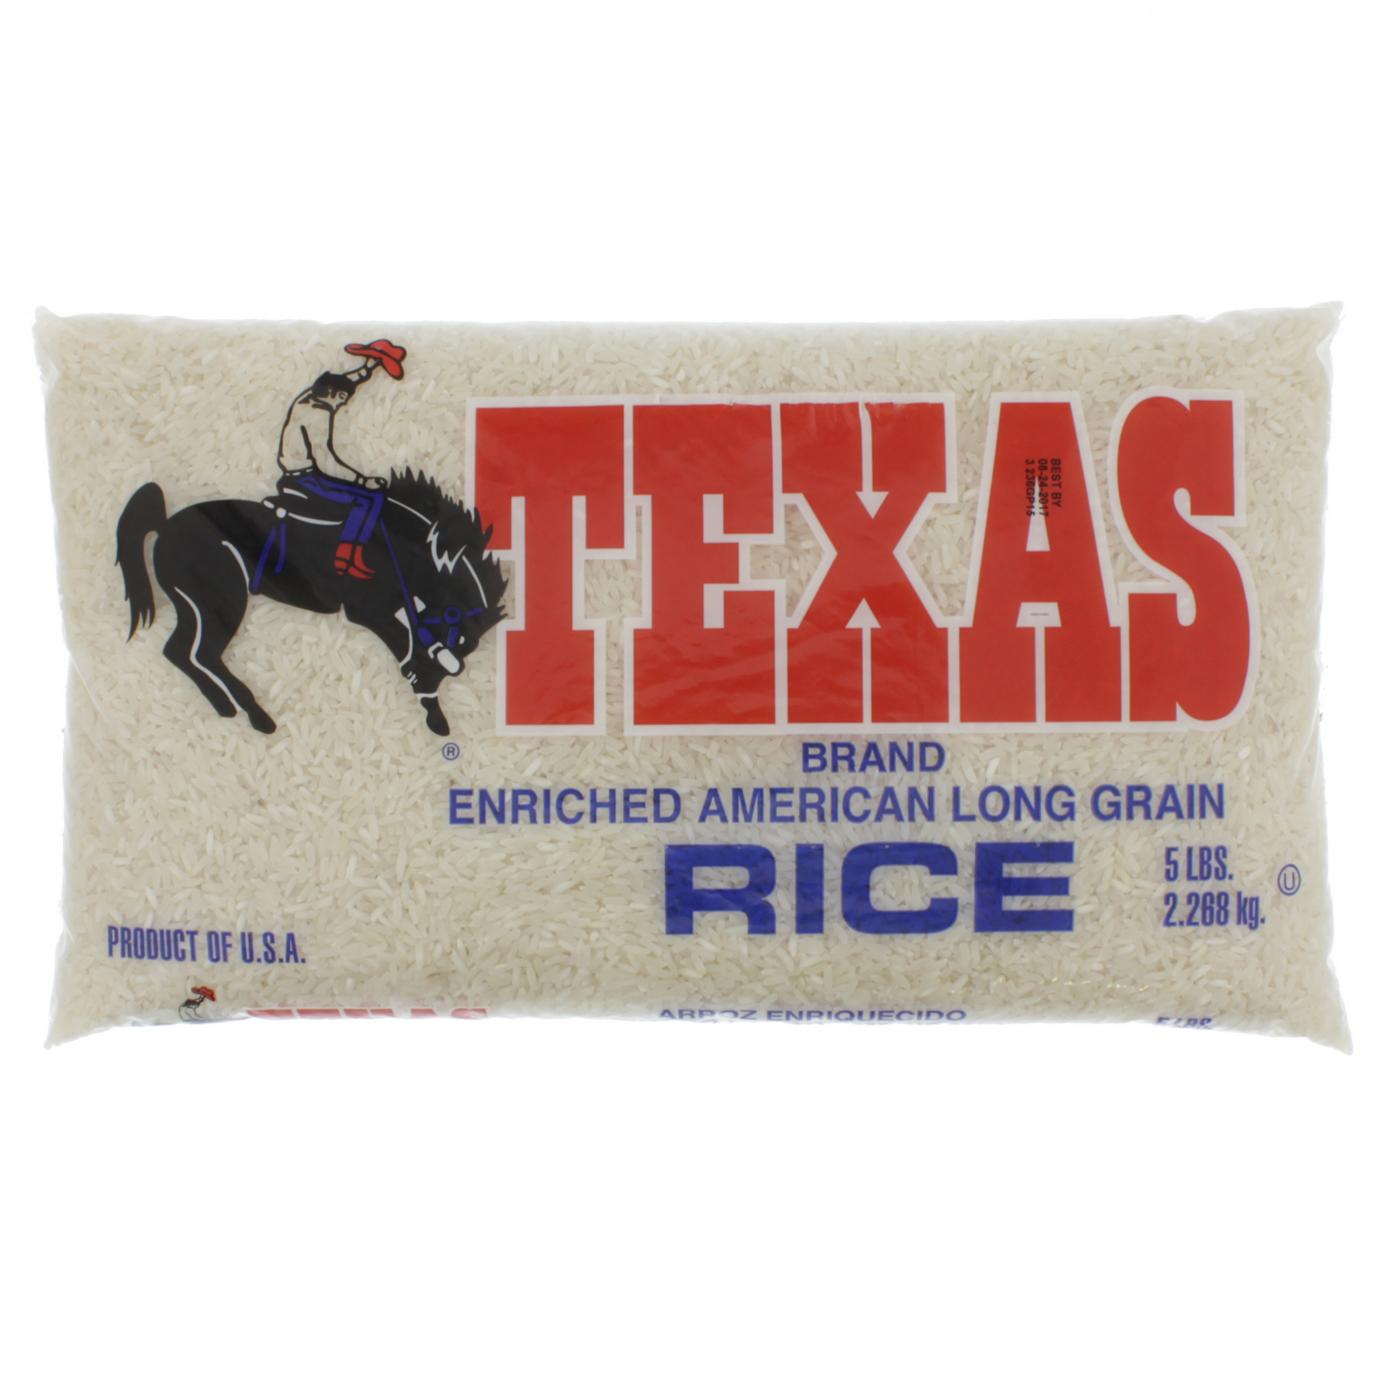 Texas Brand Enriched American Long Grain White Rice; image 1 of 2